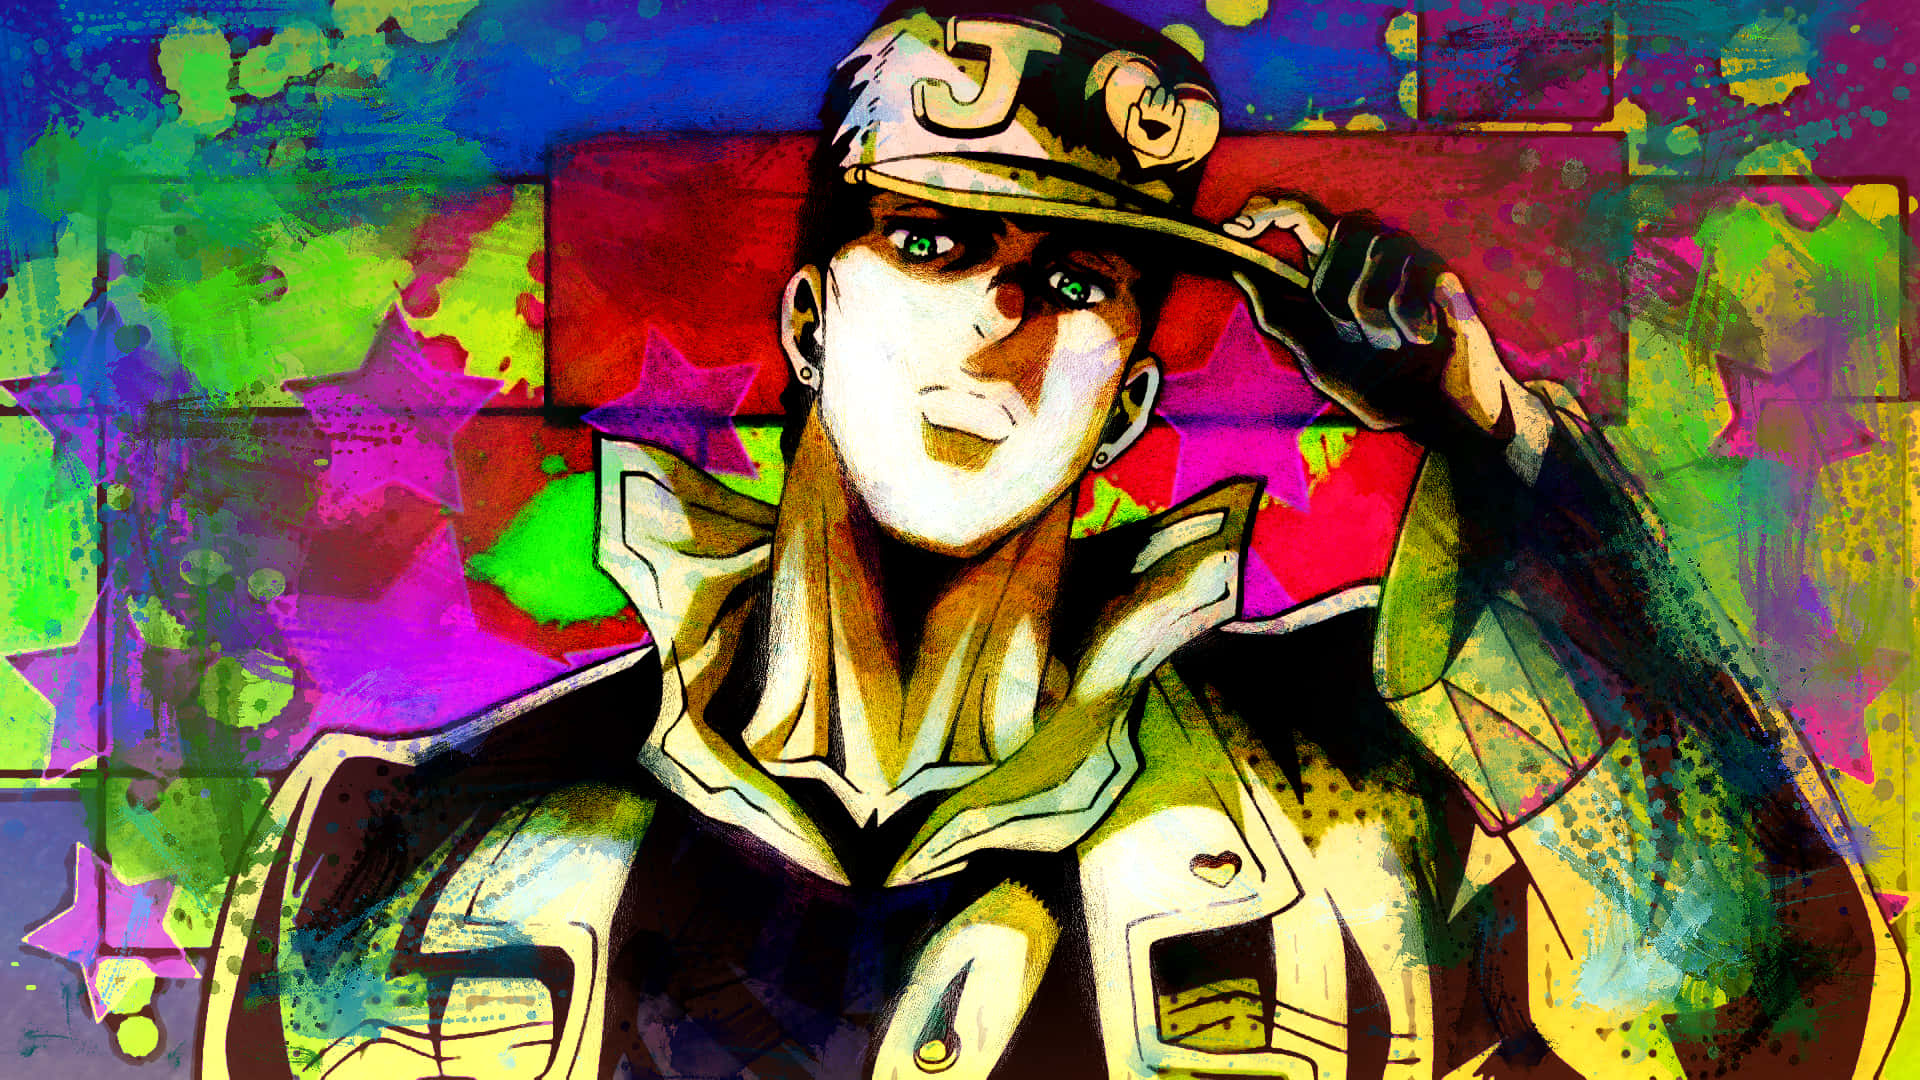 "The Brave Jotaro Kujo Stands Victorious Over His Foe"